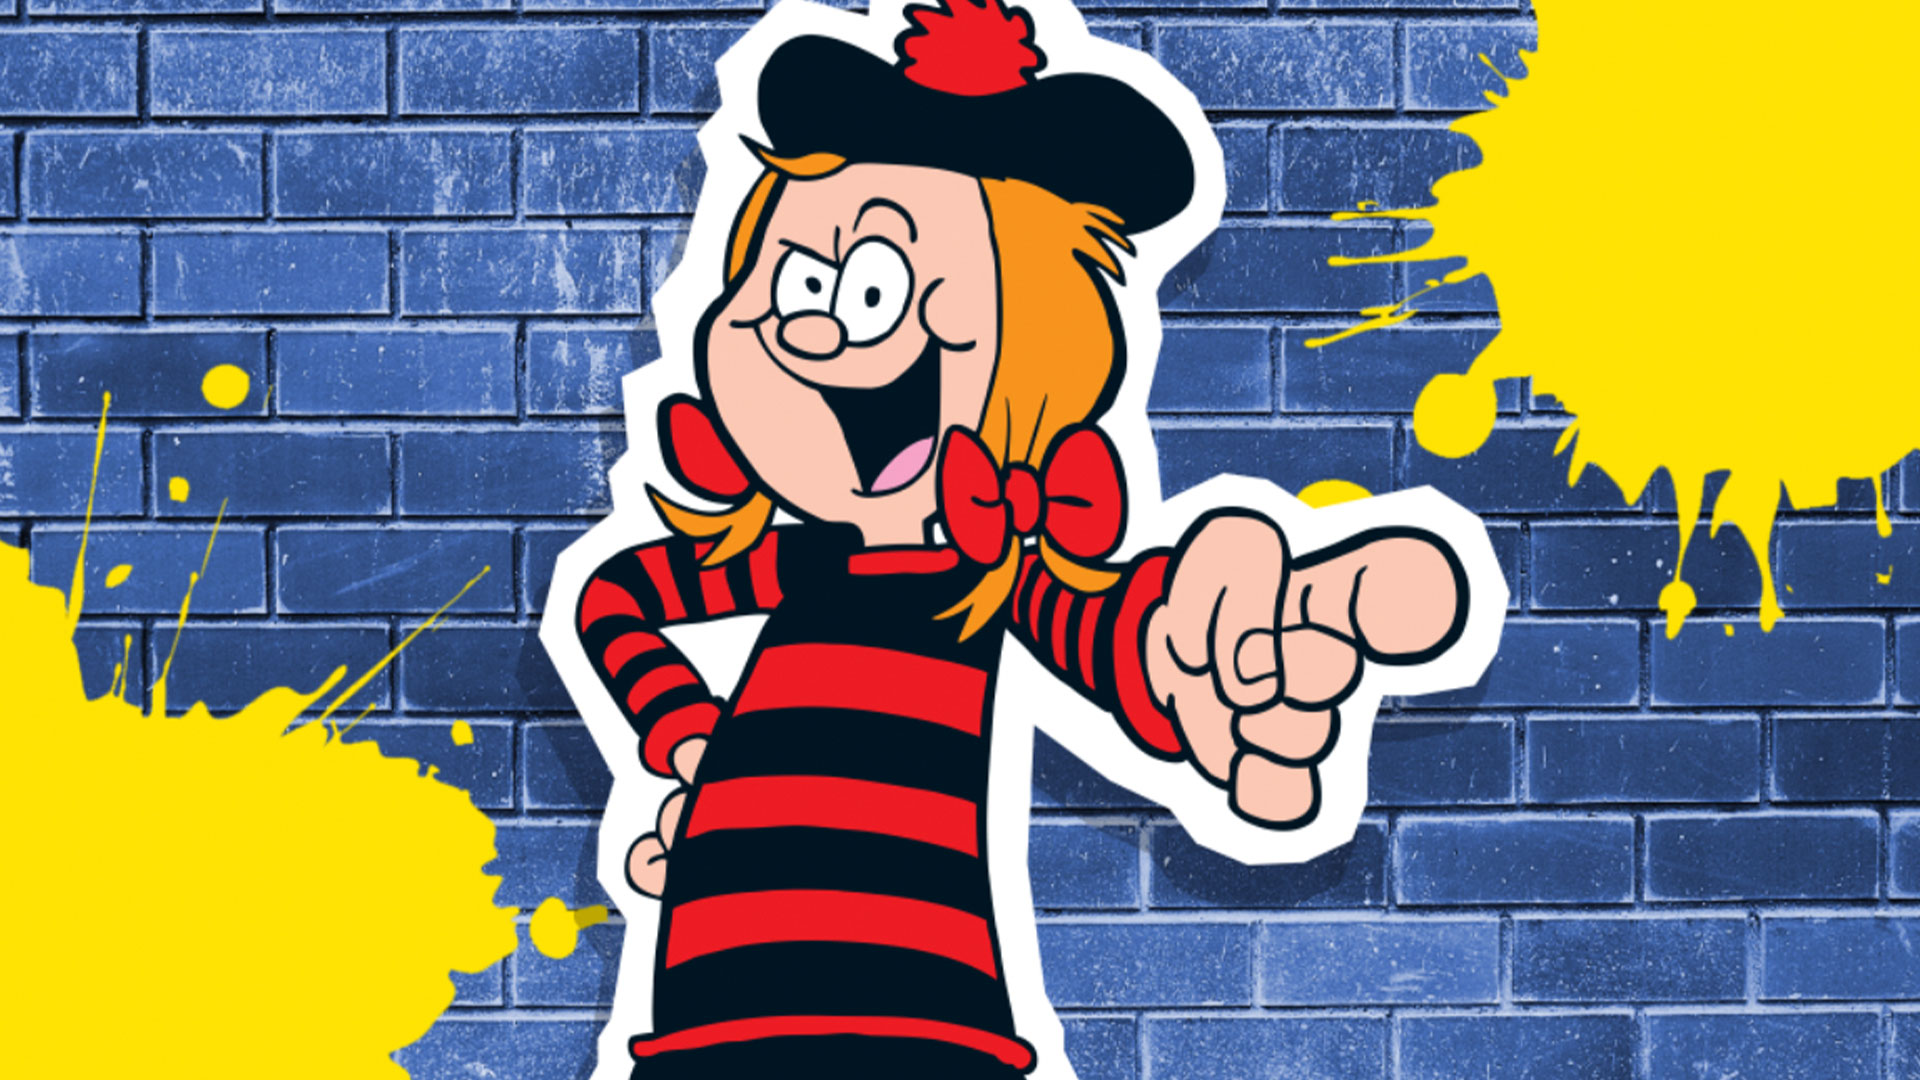 Minnie the Minx pointing in front of a brick wall